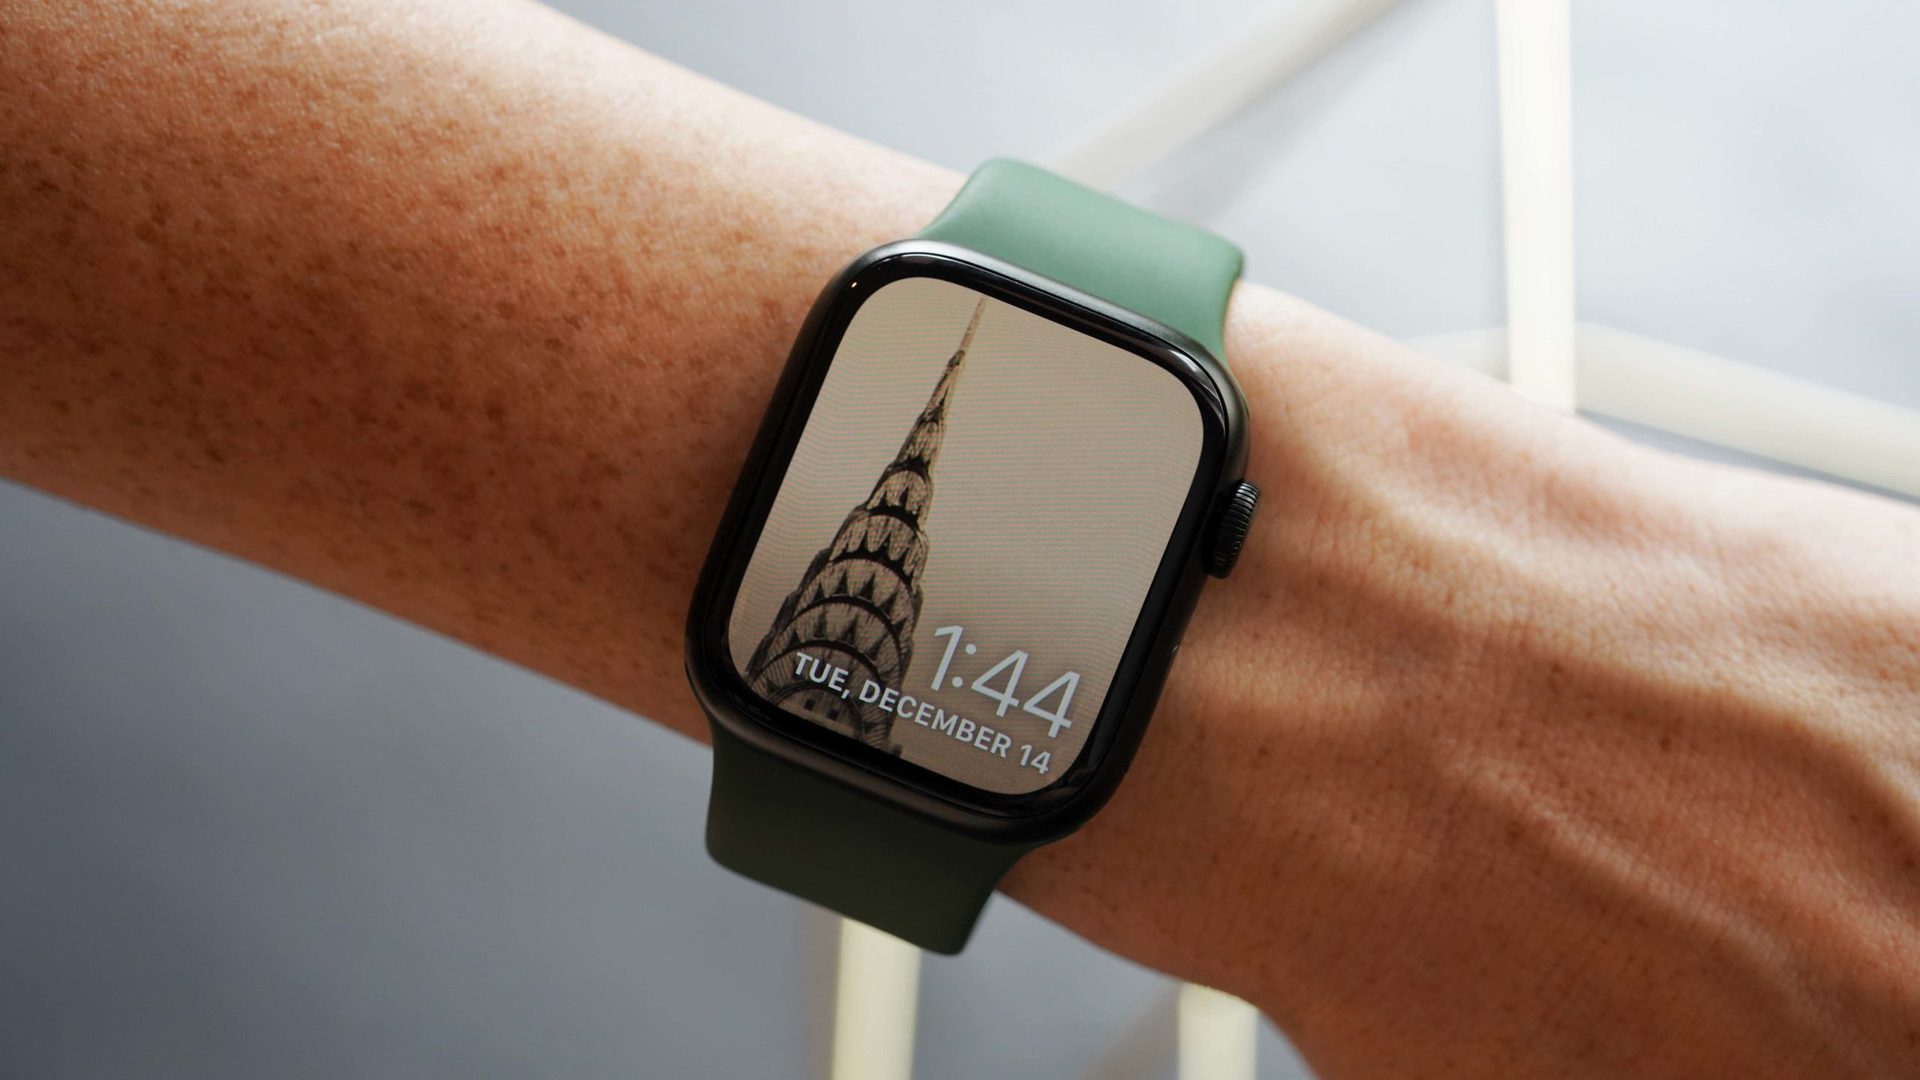 An Apple Watch Series 7, our pick for best smartwatch, displays a photo watch face while strapped onto a user's wrist.